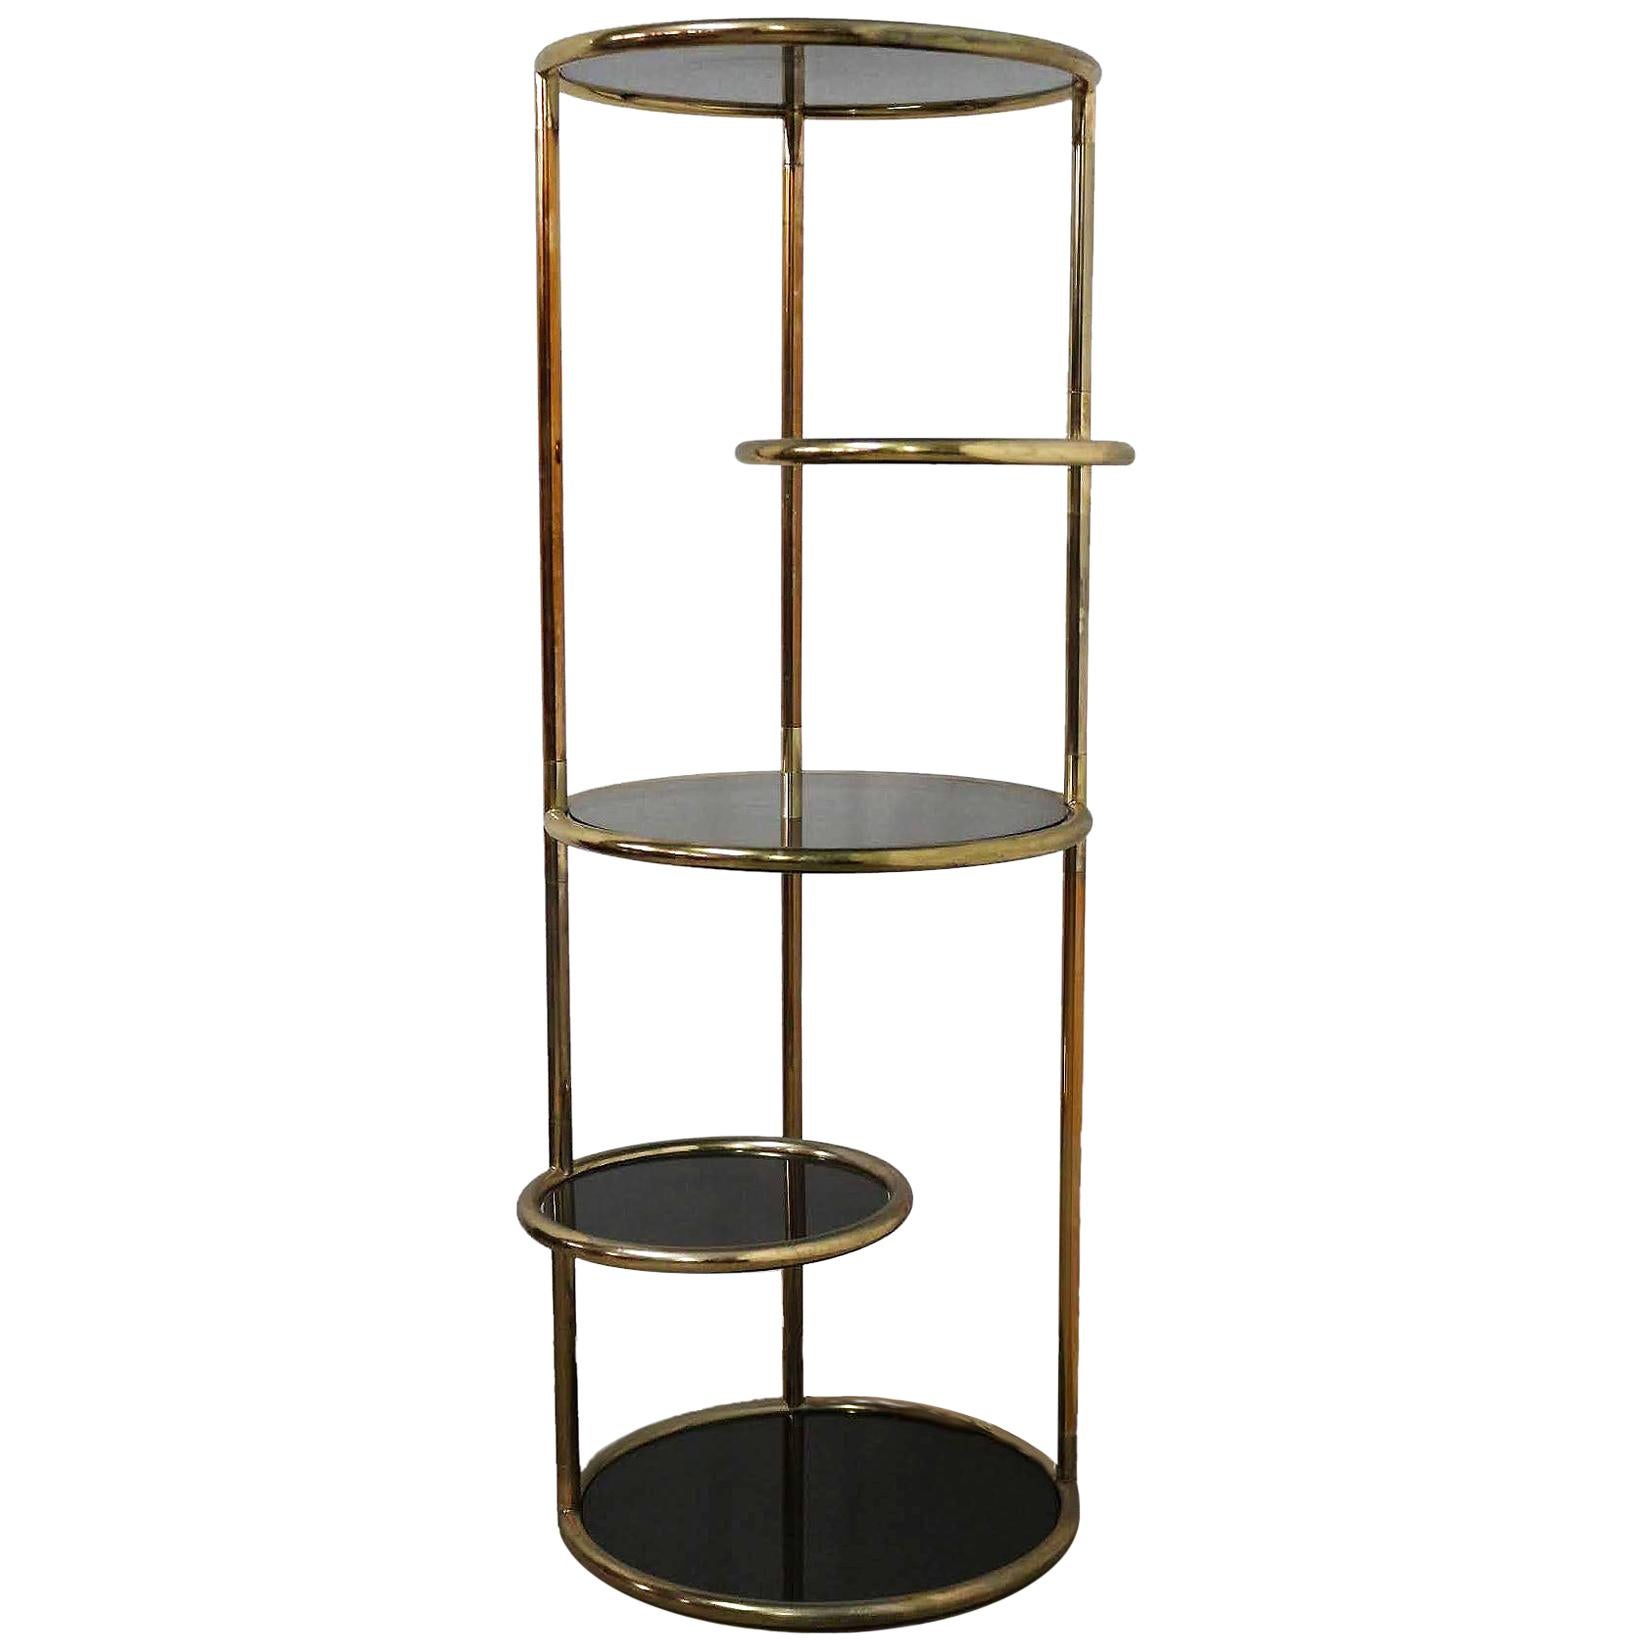 Glass and Metal Articulated Display Unit Five-Tiered Table Plant Stand